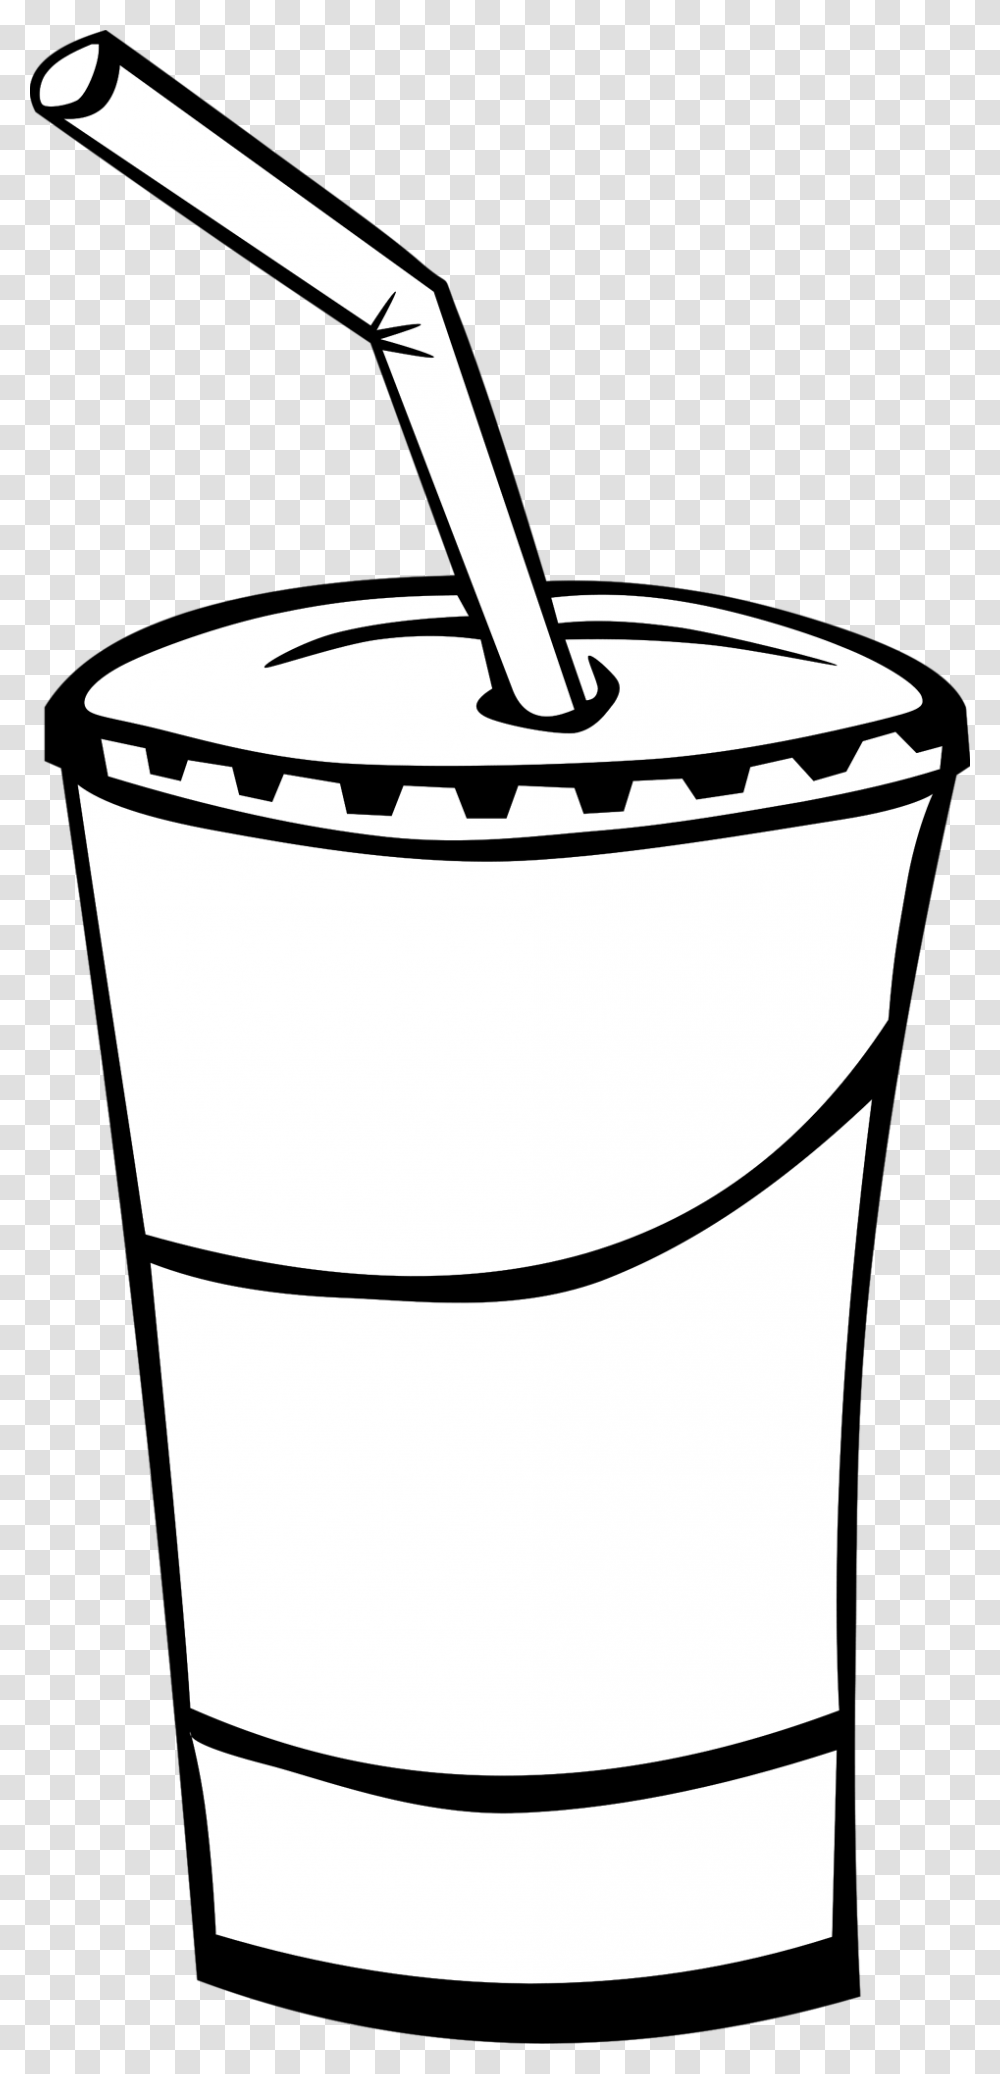 Cup Free Stock Photo Illustration Of A Soda Cup, Lamp, Drum, Percussion, Musical Instrument Transparent Png